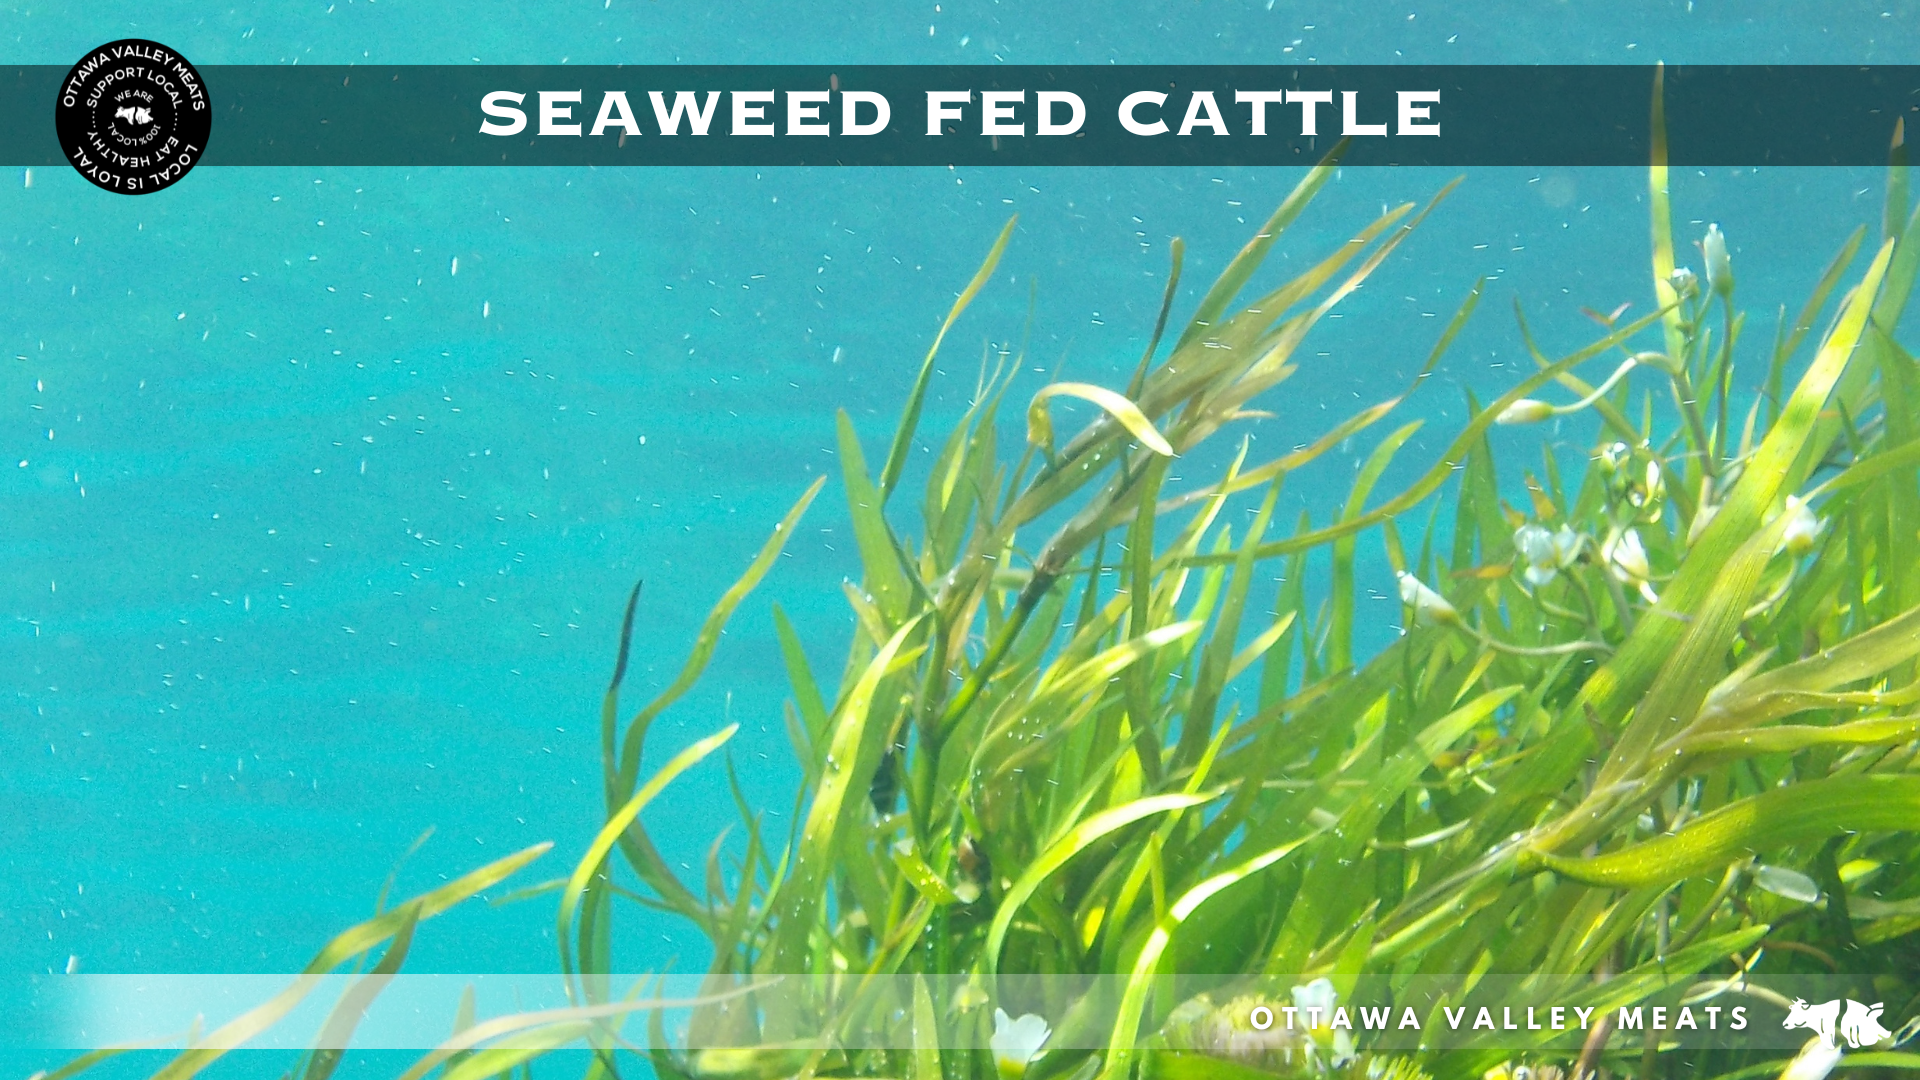 Seaweed Fed Cattle | Low Emission Beef